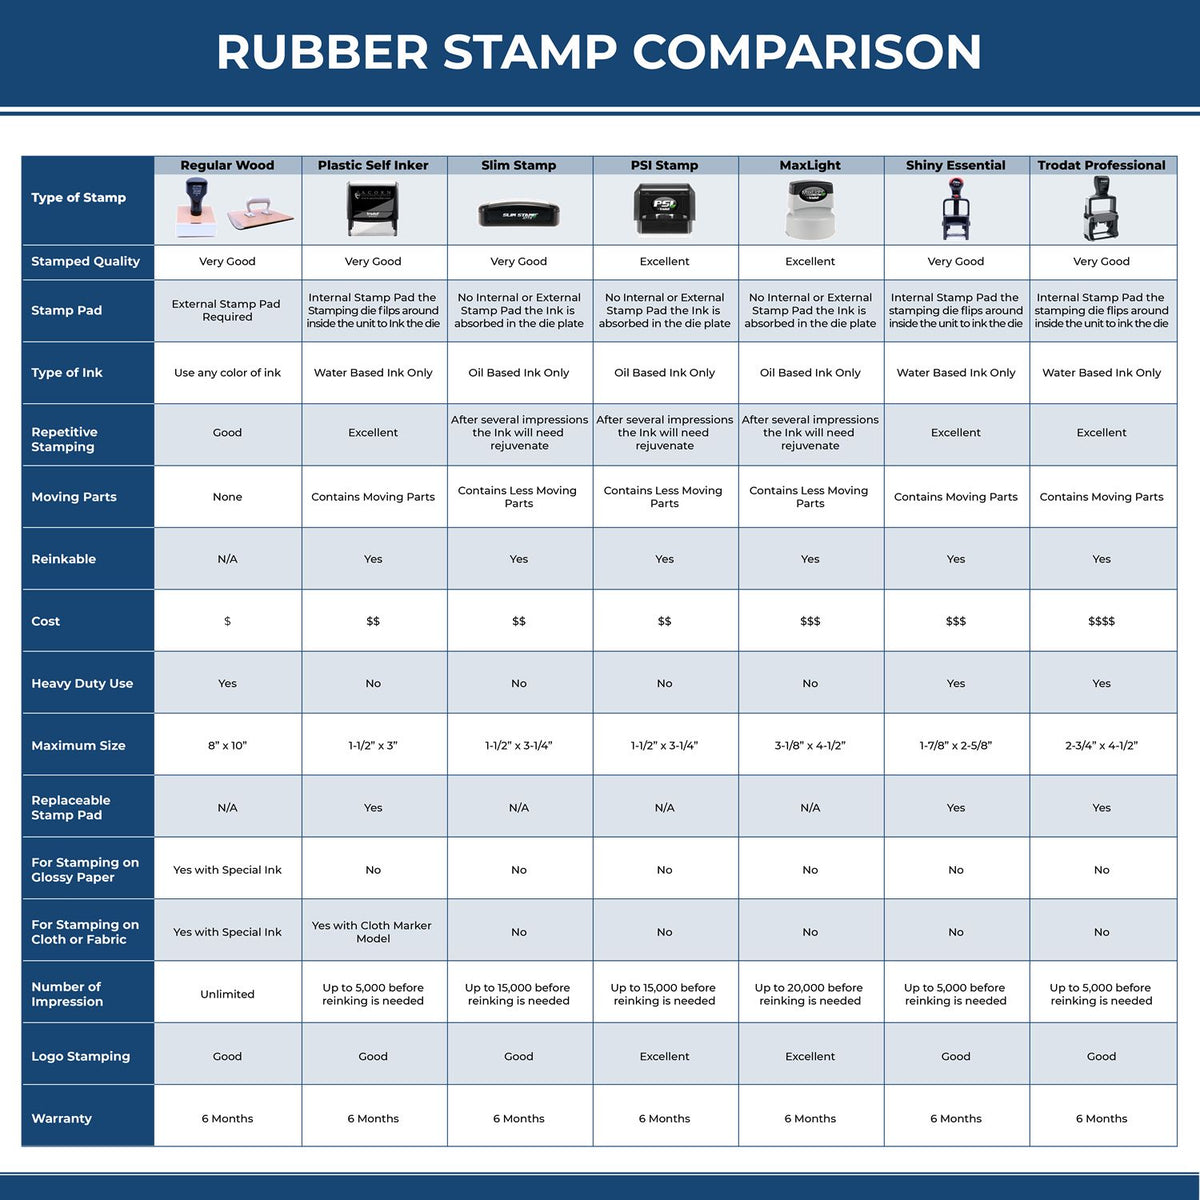 Self Inking Superseded Stamp 3047S Rubber Stamp Comparison